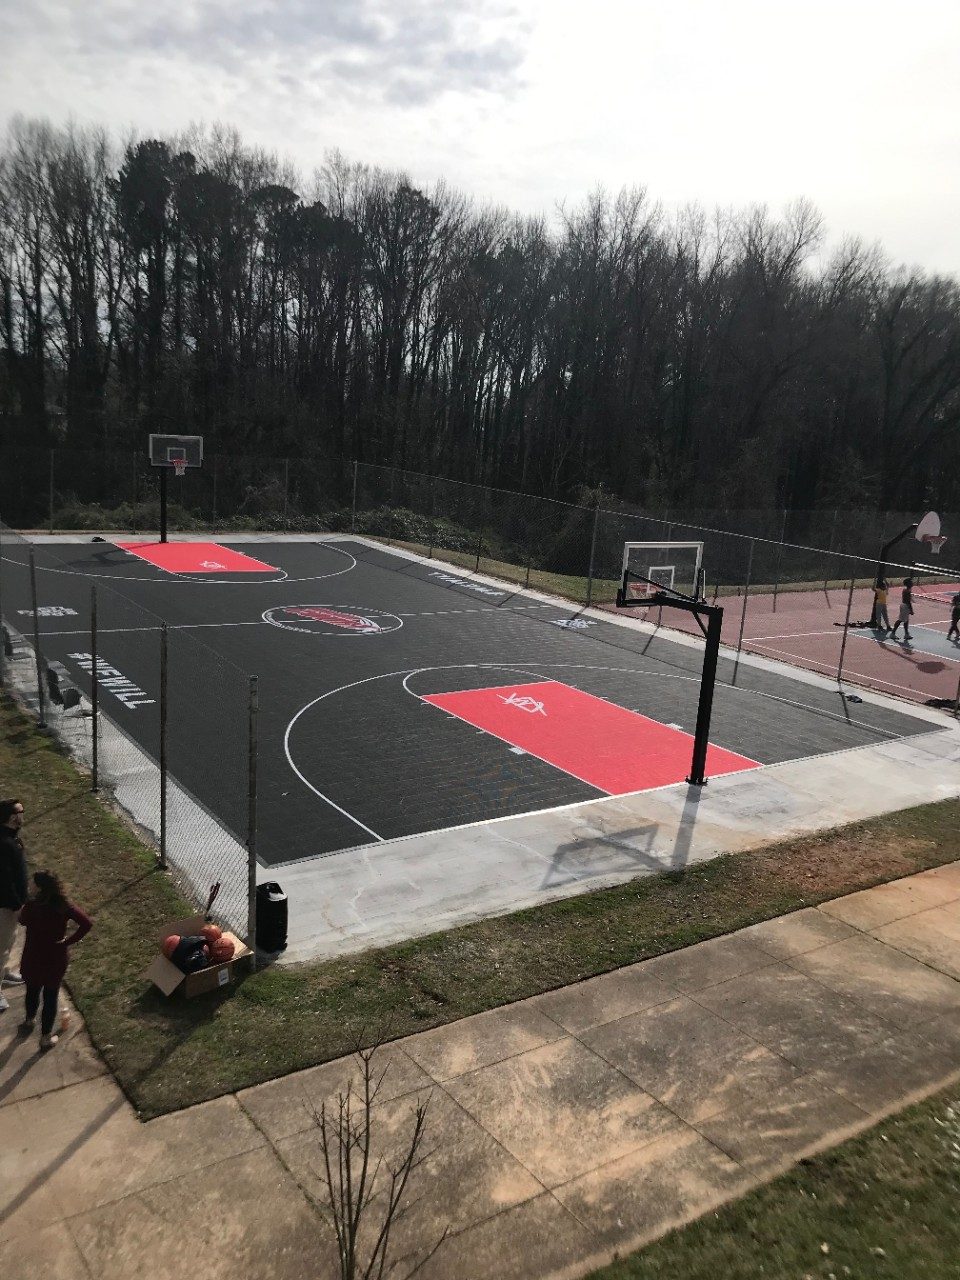 After the outdoor court refurbishment 